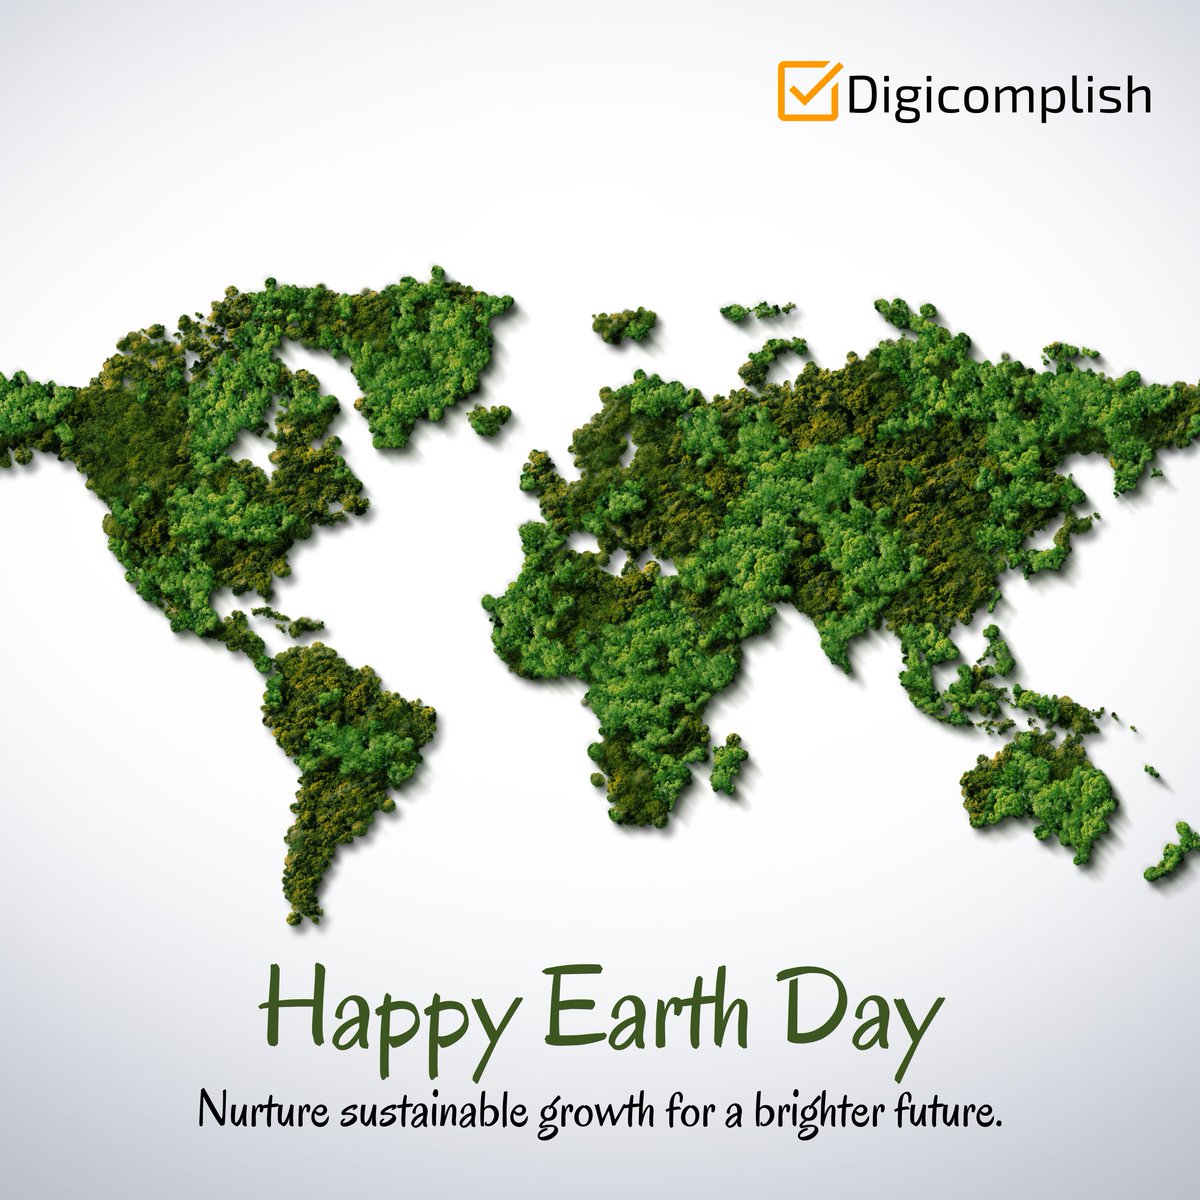 Happy Earth Day!

Join us cultivating sustainable growth and nurturing nature daily. Let's plant seeds of change for a brighter, greener future.

#HappyEarthDay #SustainableGrowth #NurtureNature